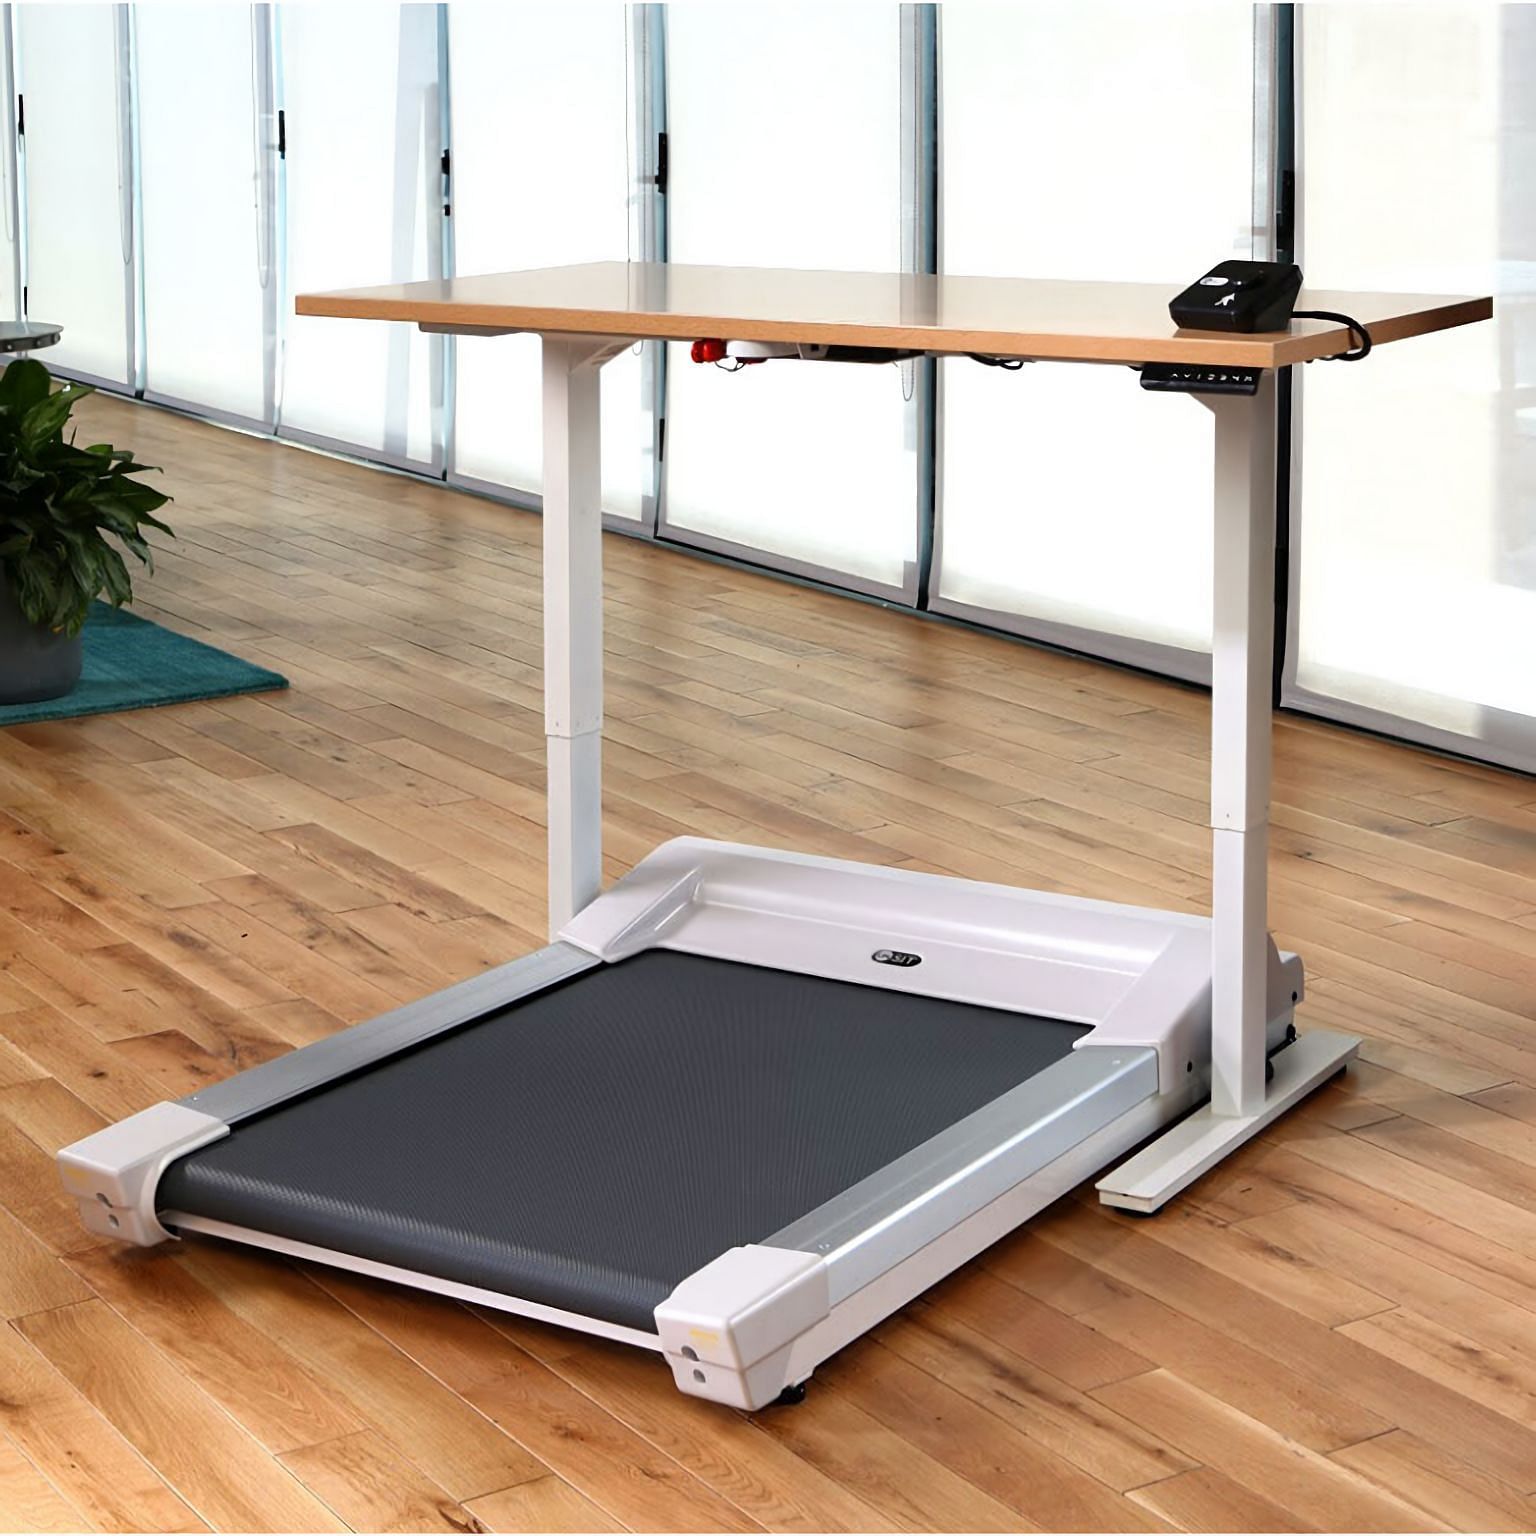 Commercial grade treadmill with a silent motor - Perfect for office workspace